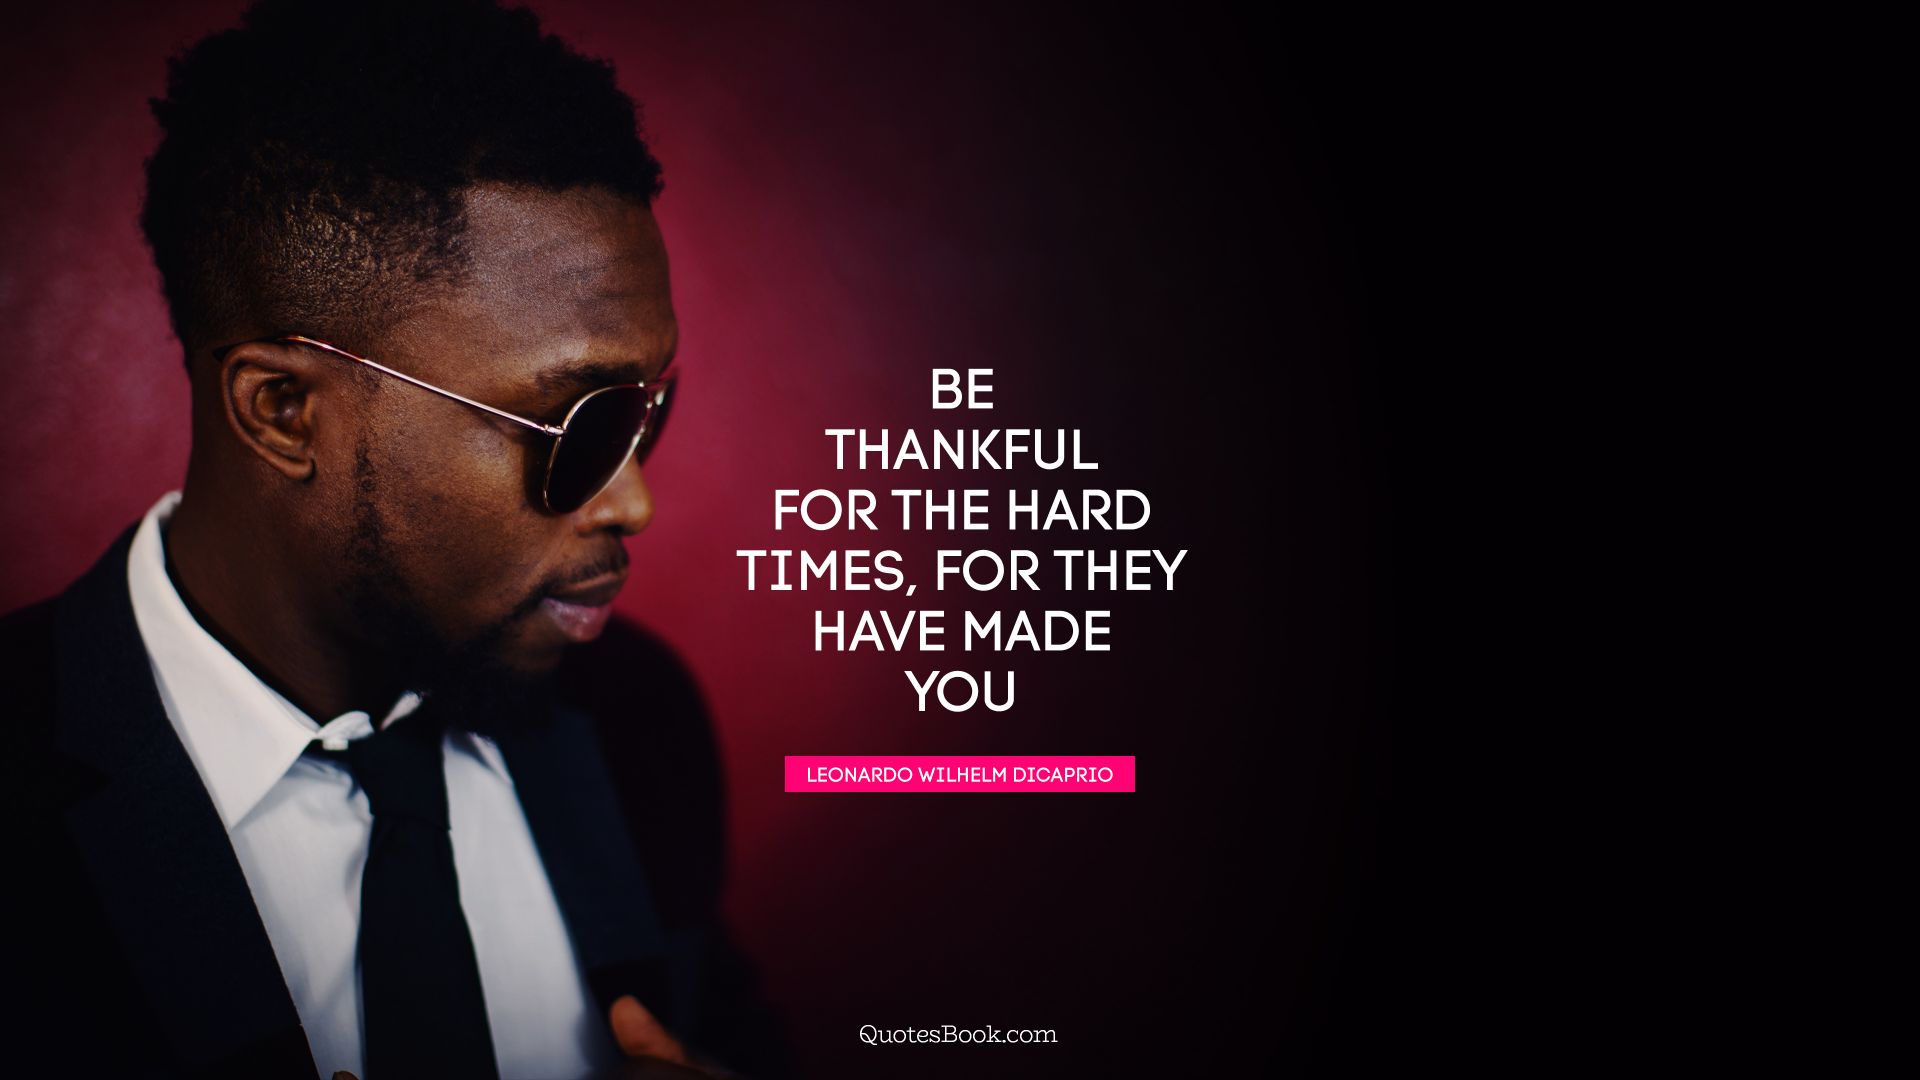 Be thankful for the hard times, for they have made you. - Quote by Leonardo Wilhelm DiCaprio